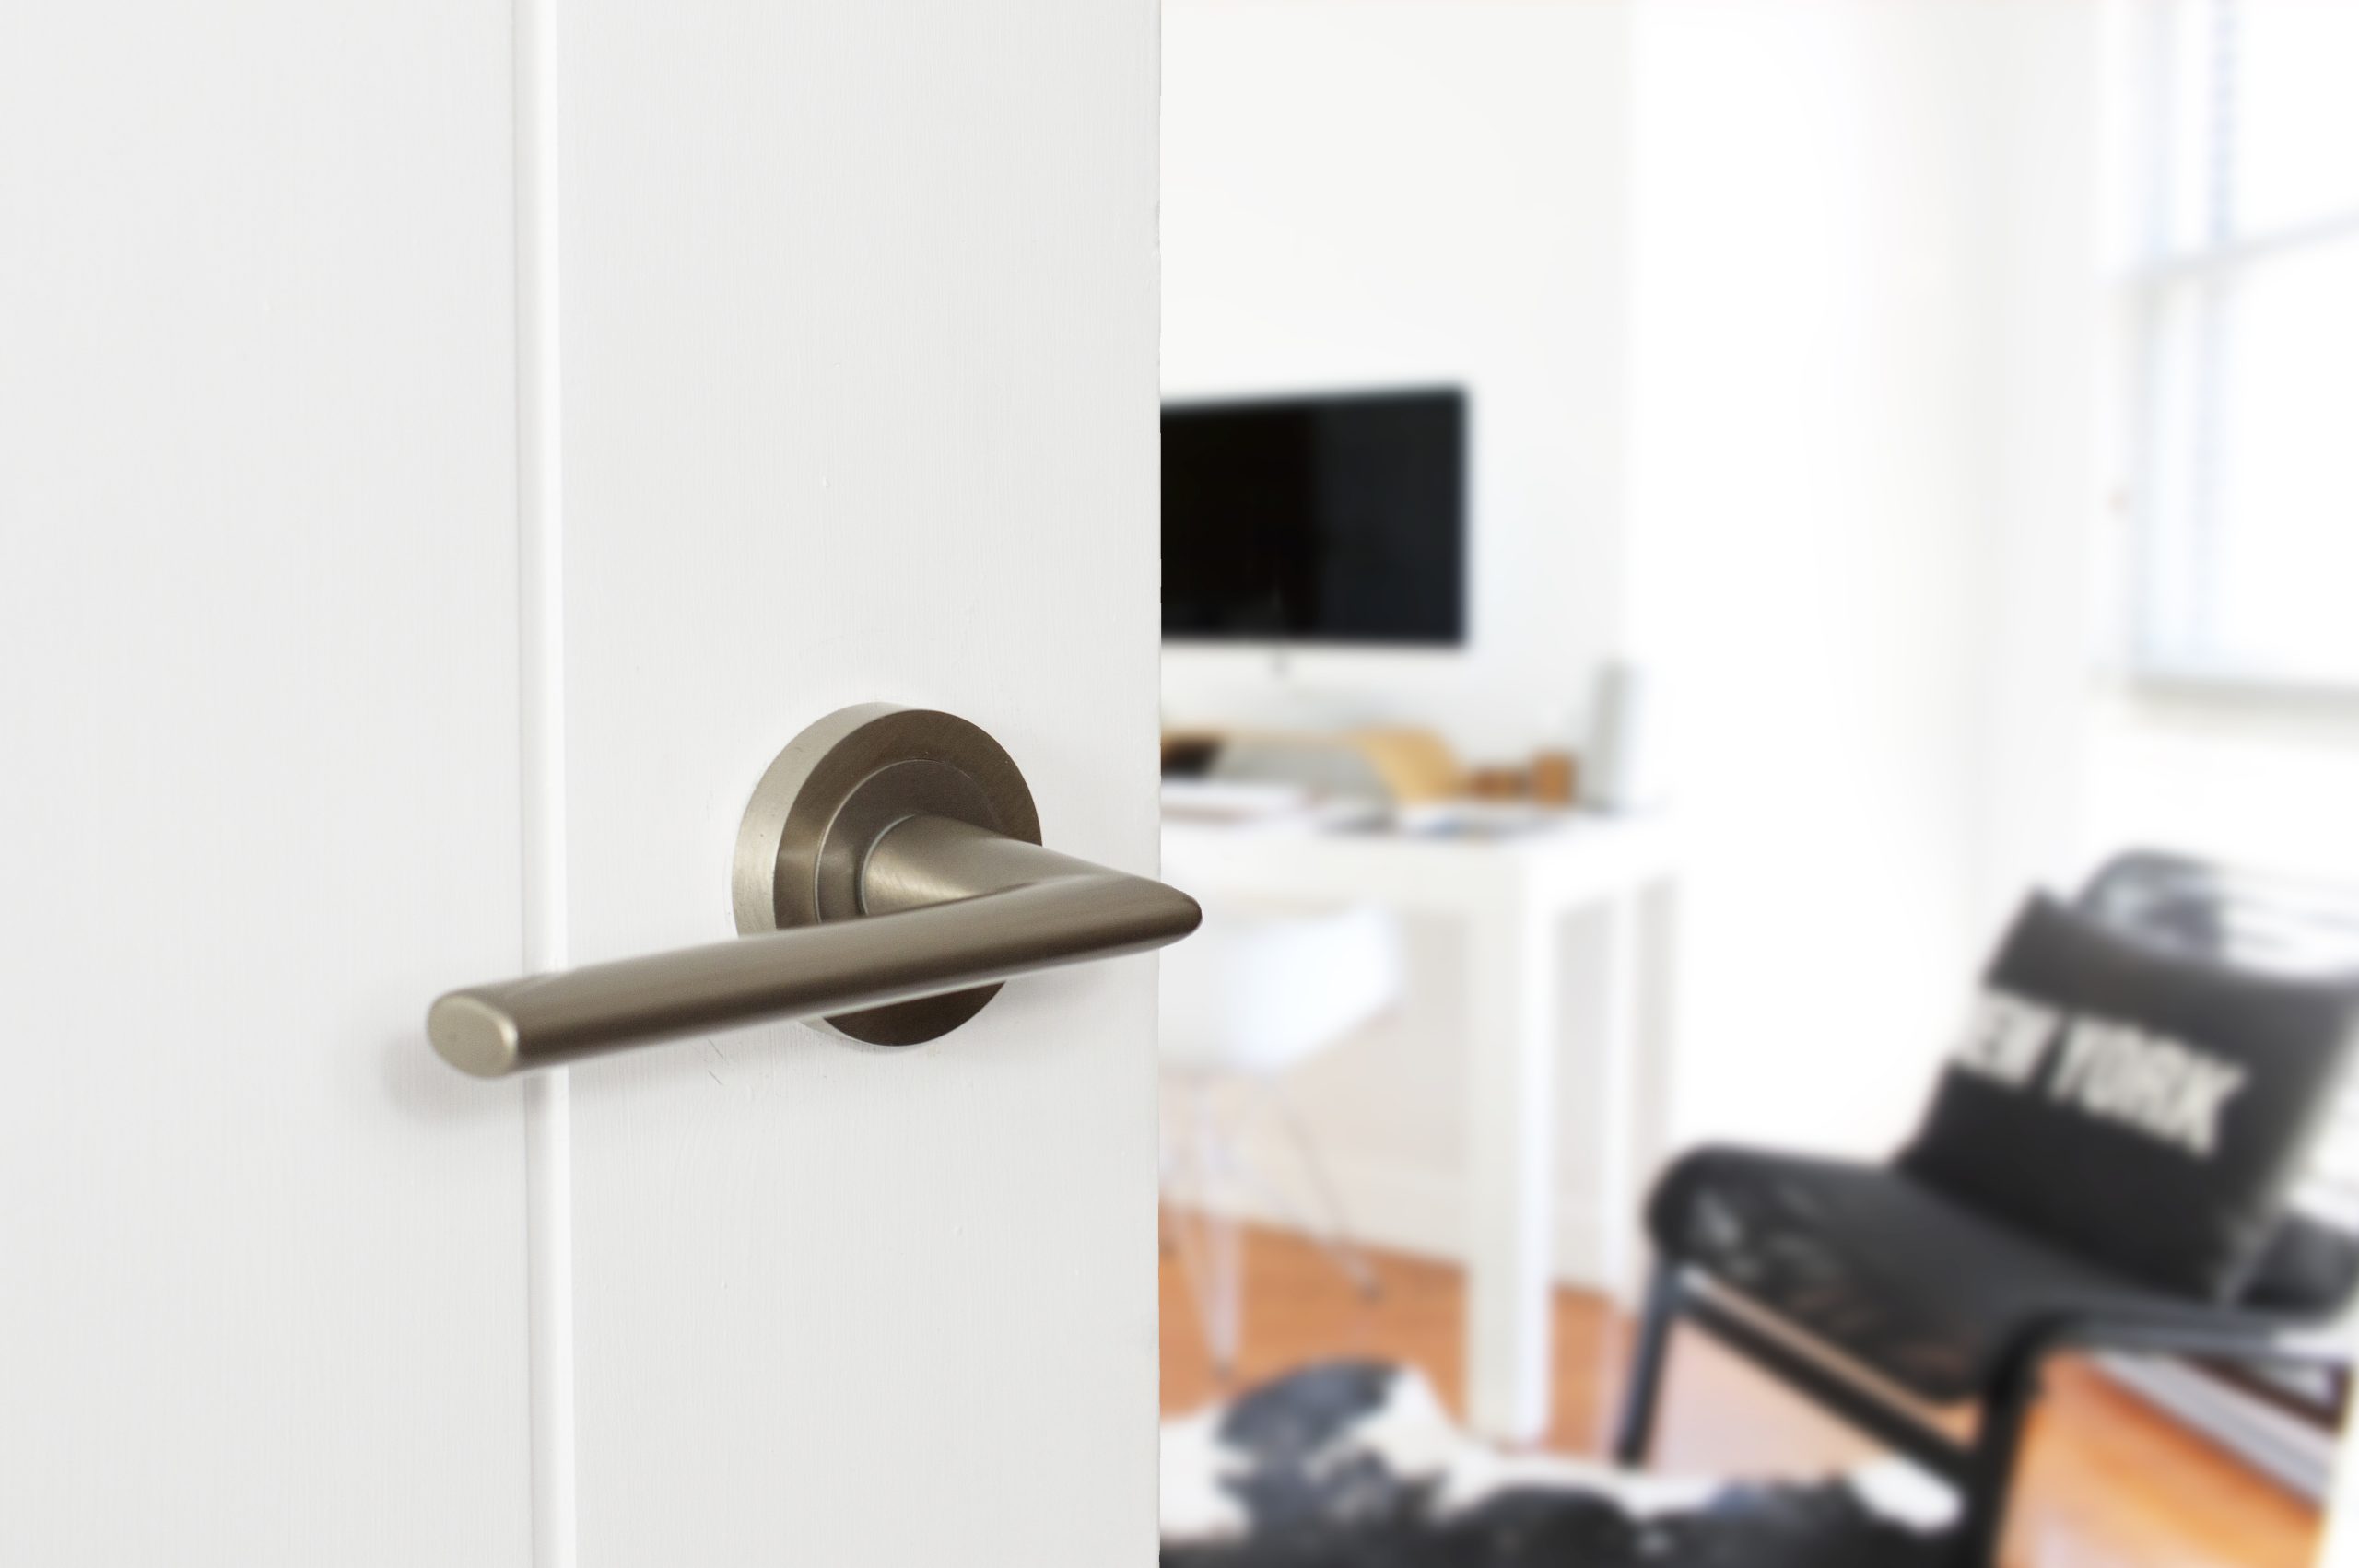 Do I need to purchase anything else with my door handles? image